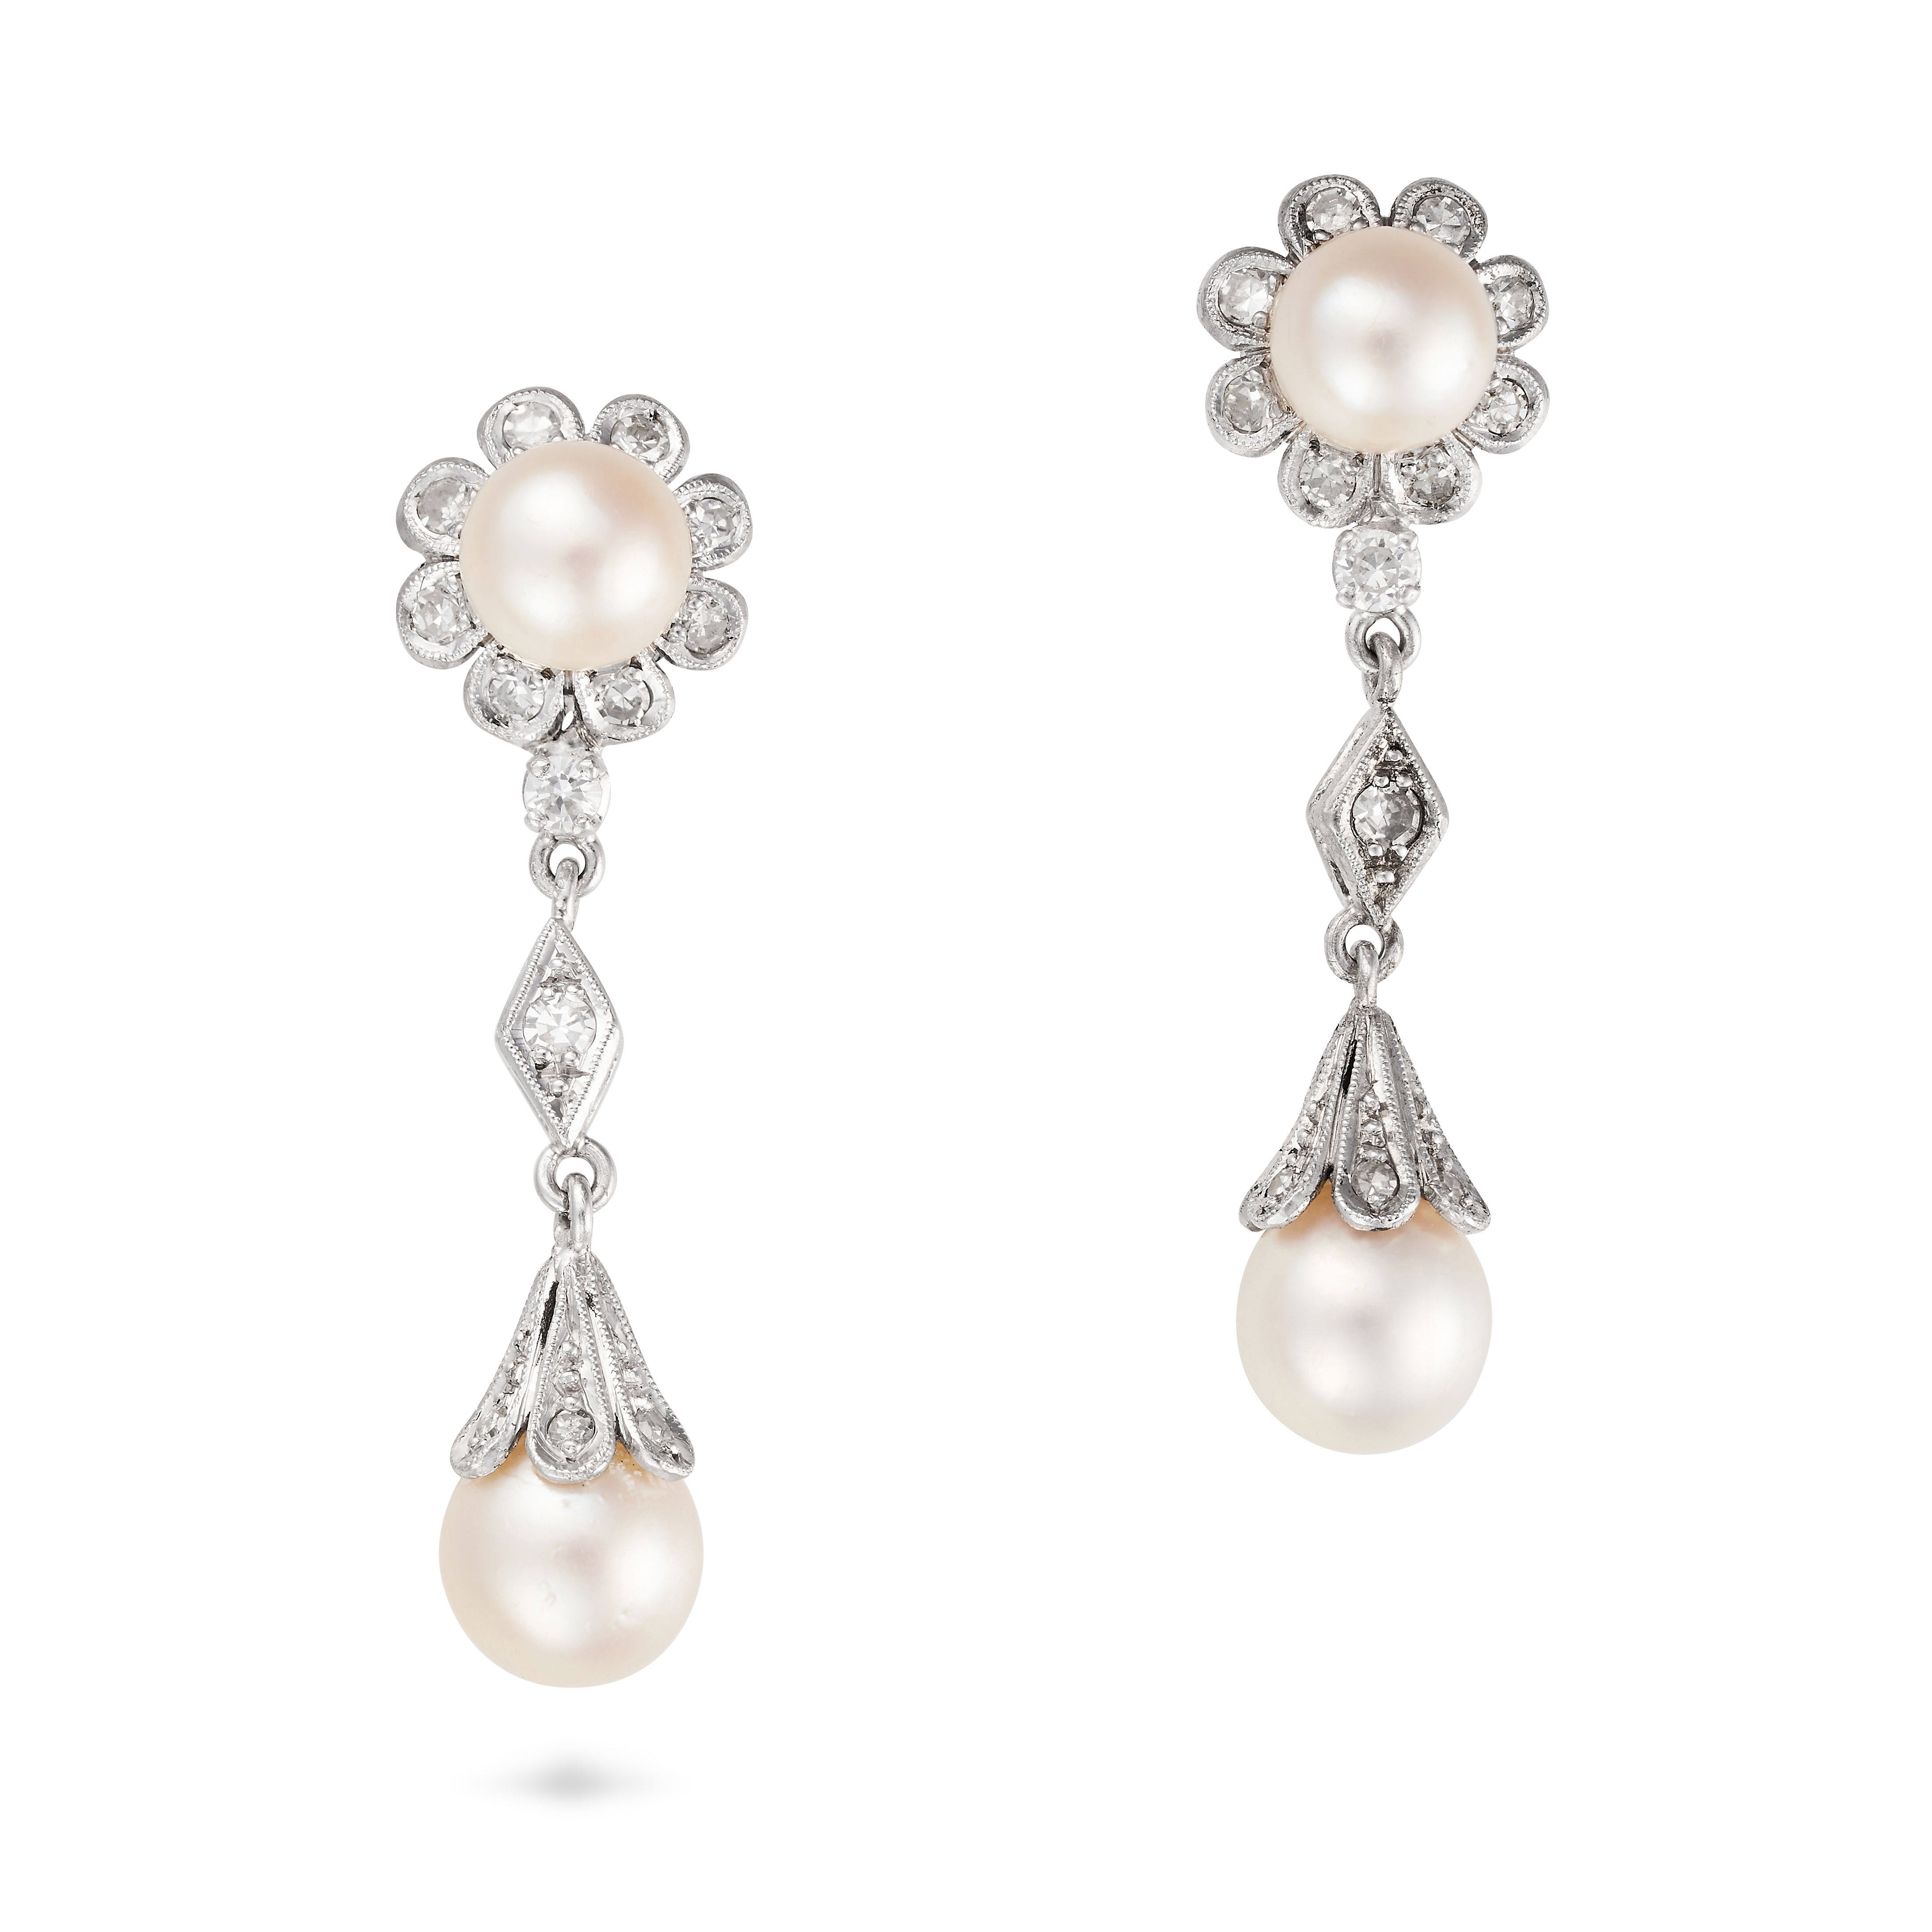 A PAIR OF PEARL AND DIAMOND DROP EARRINGS each set with a pearl in a cluster of single cut diamon...